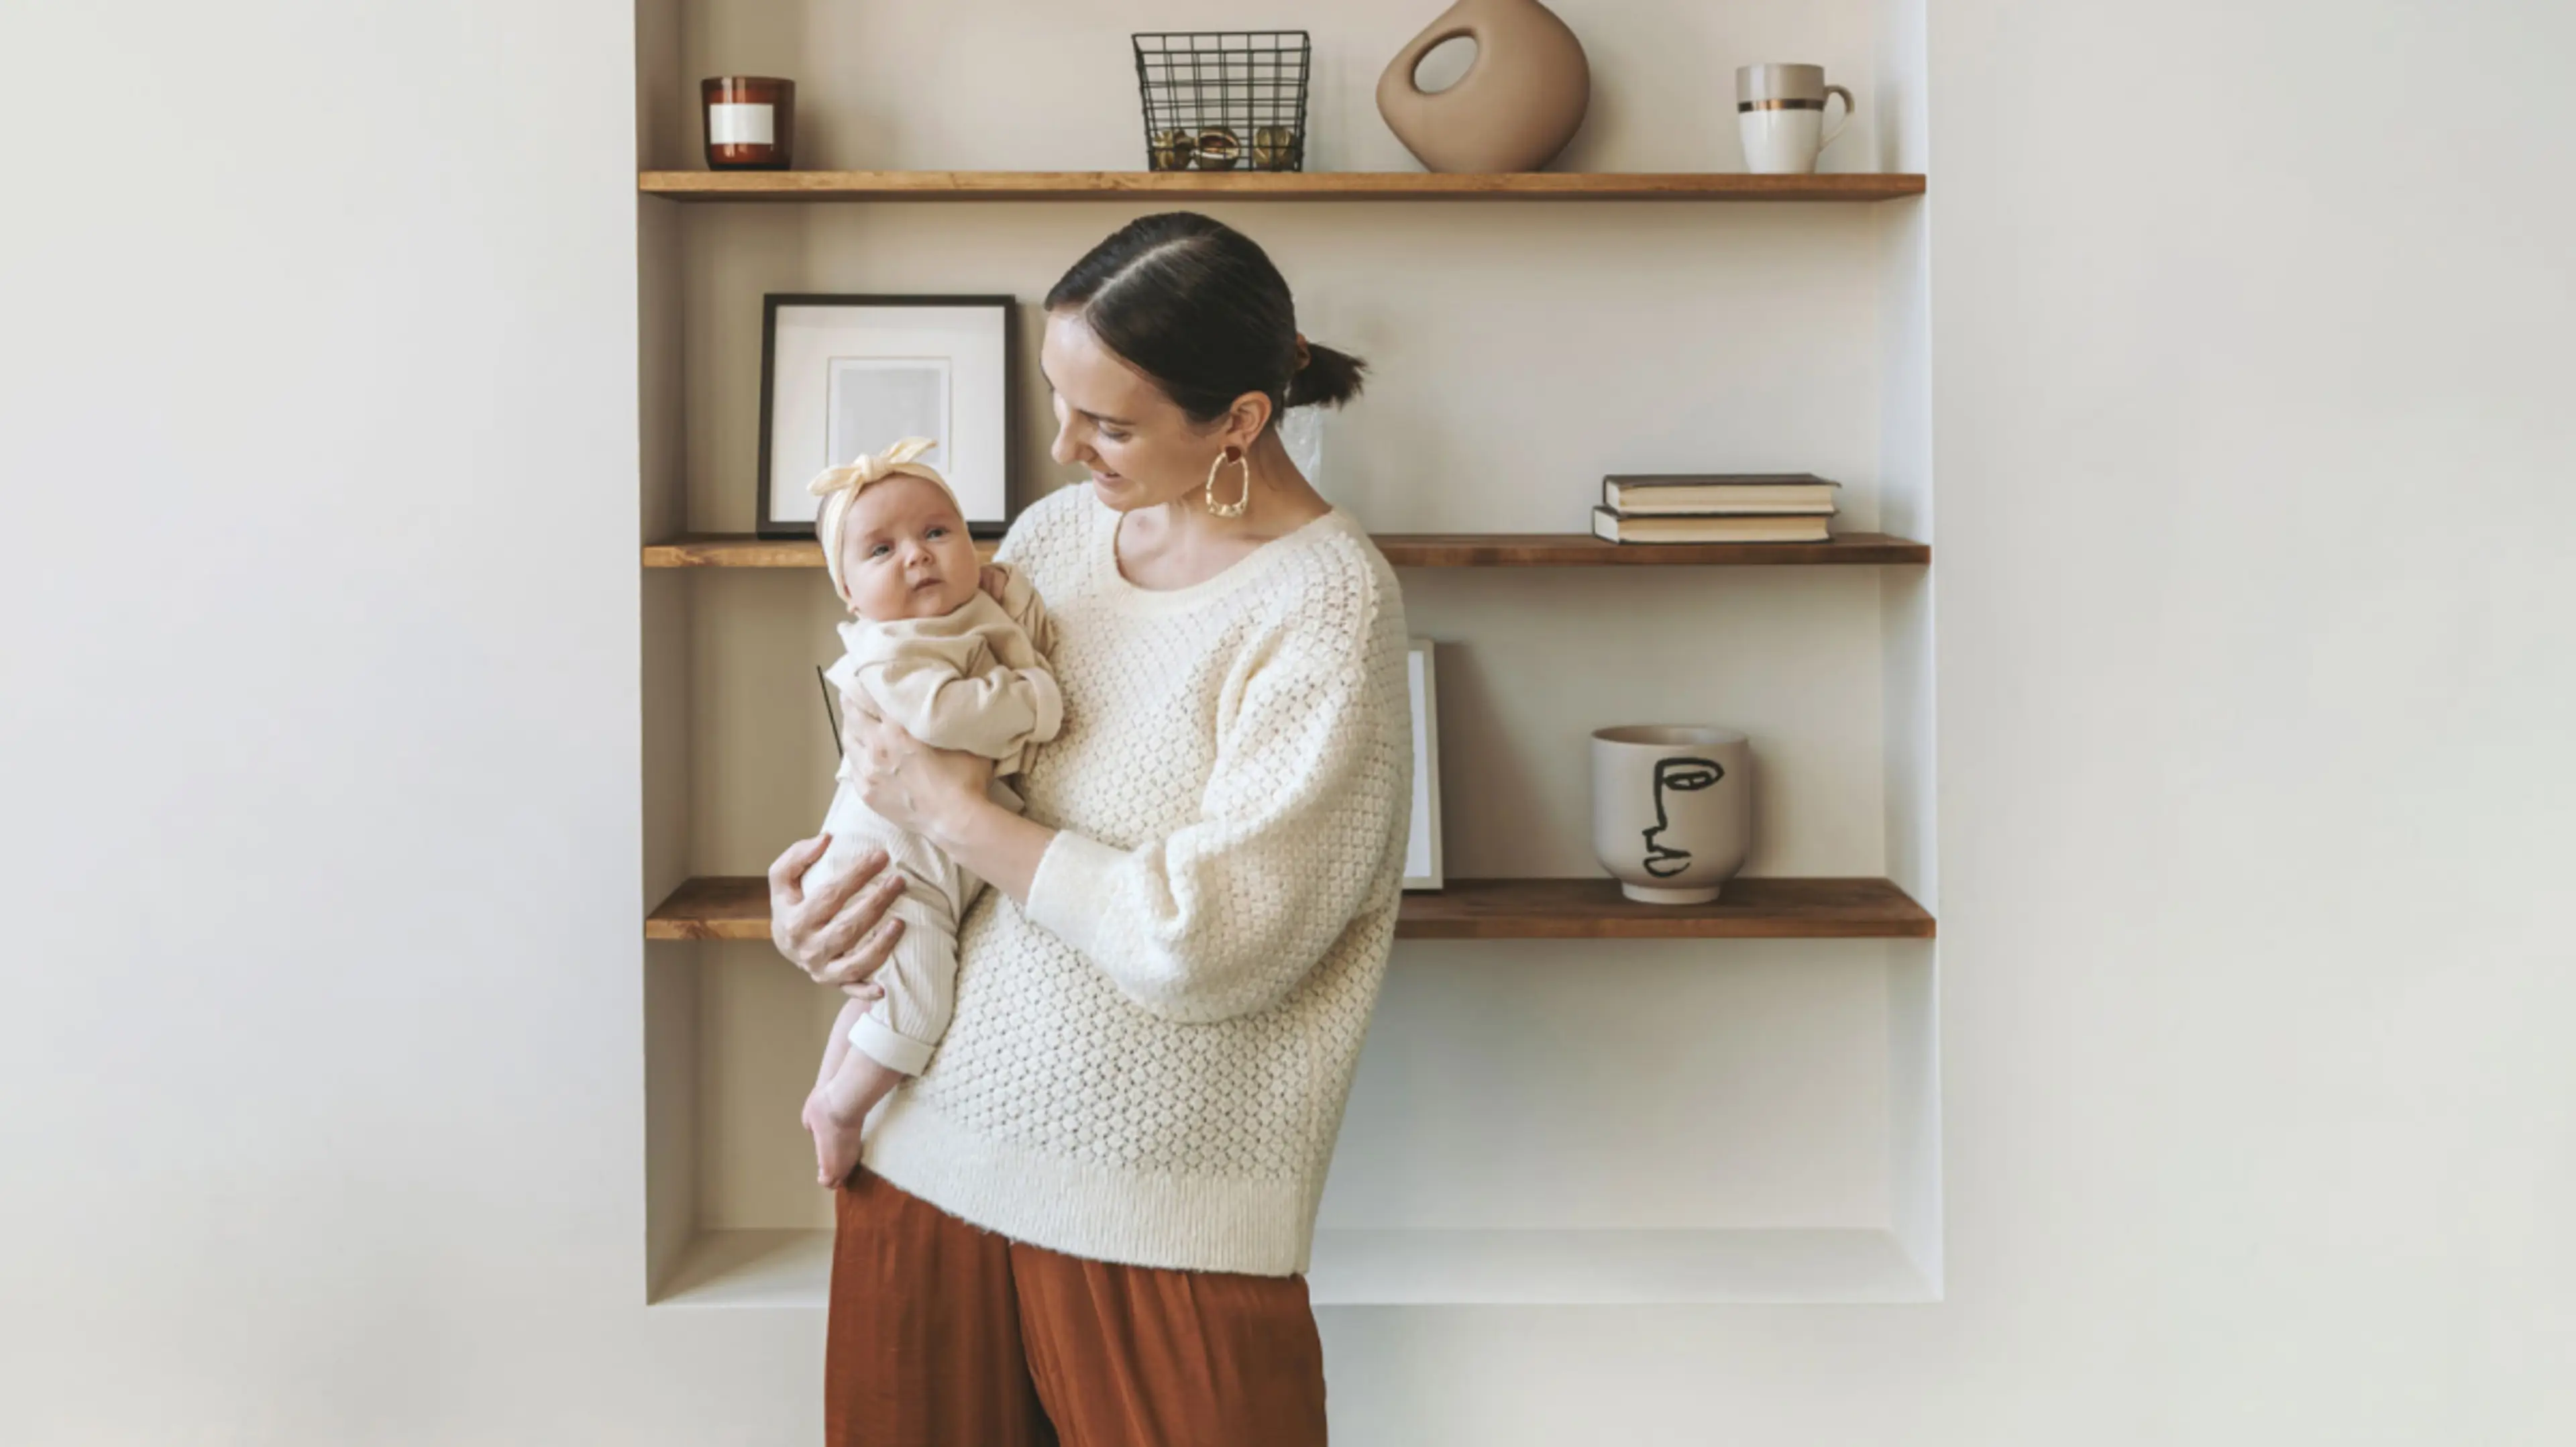 3 Strategies to Overcome Self-Doubt as a New Mom - article body